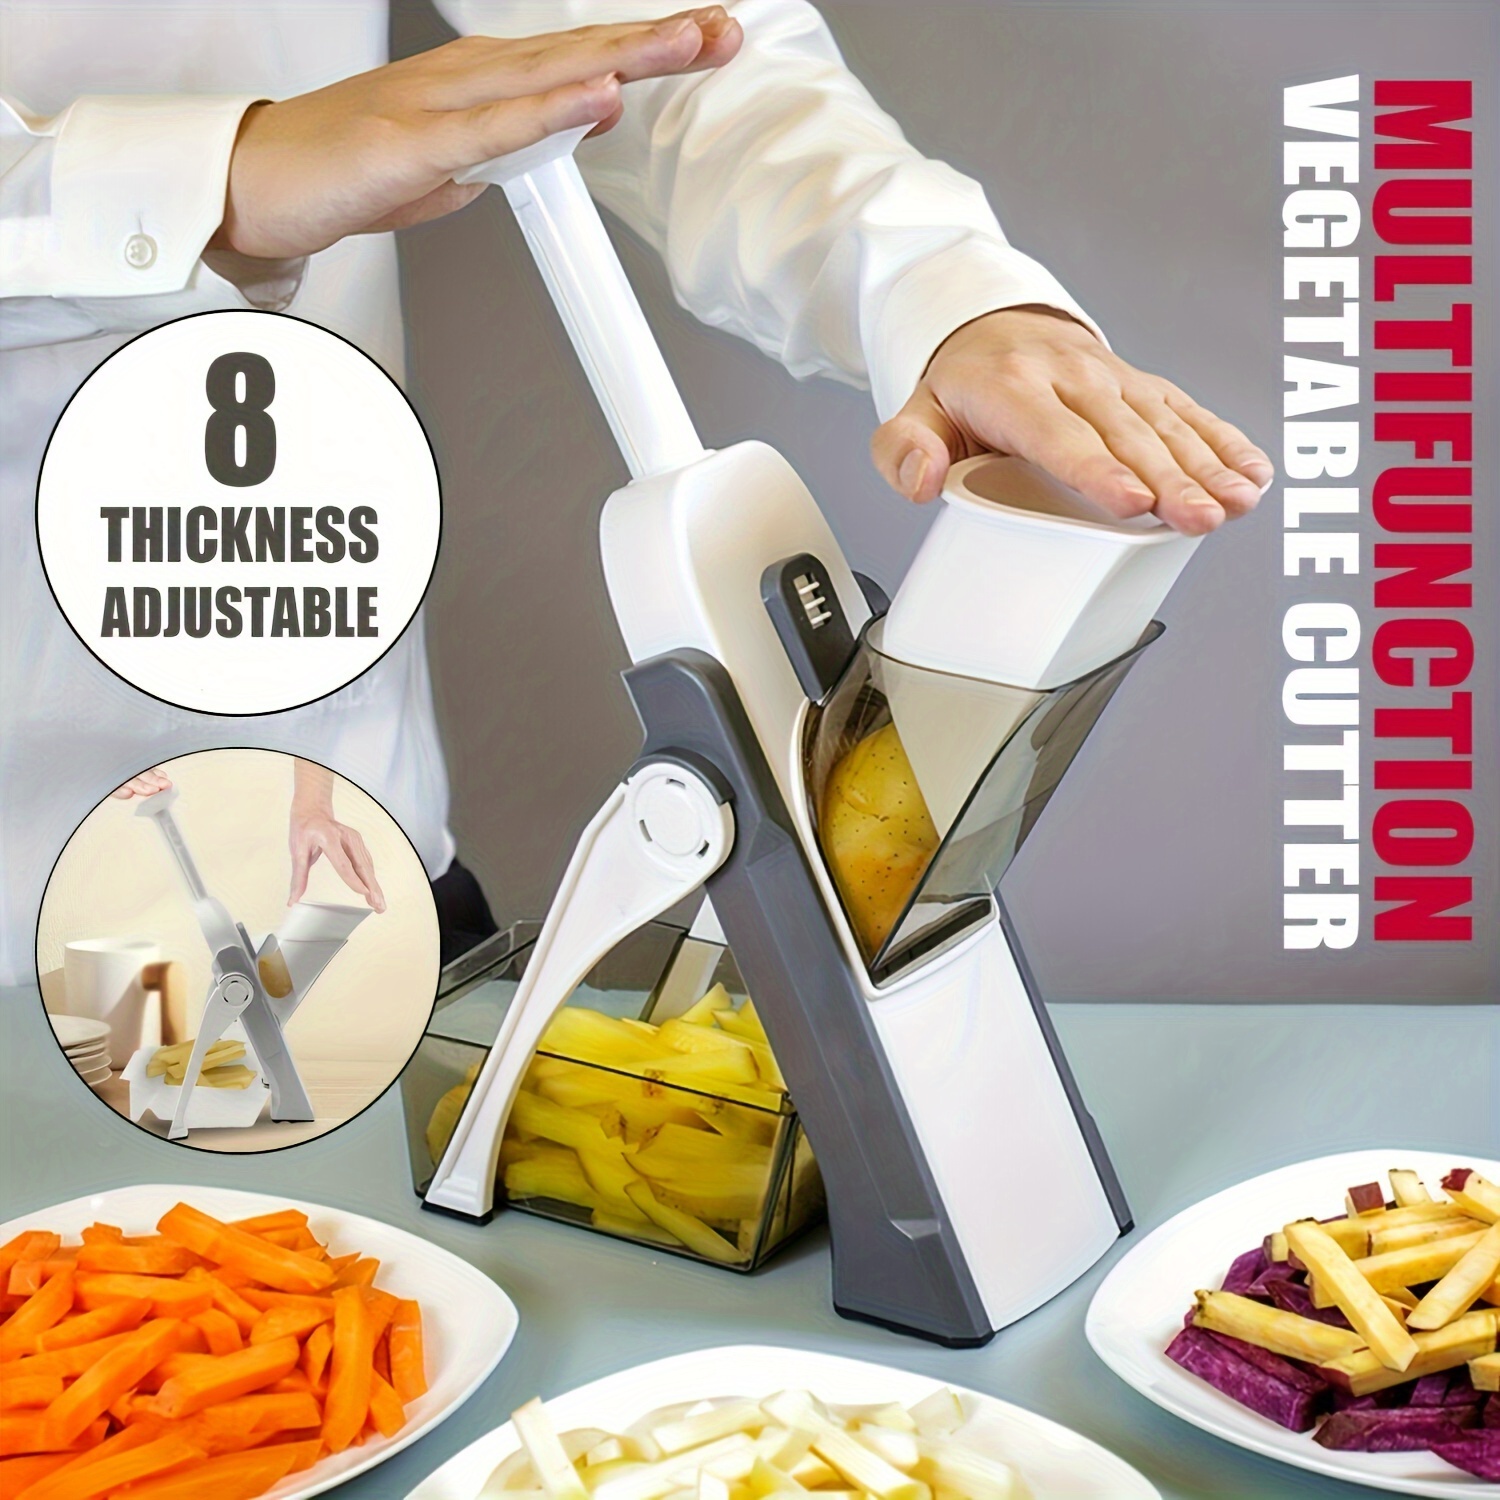 

8-in-1 Manual Vegetable Chopper & Slicer - Multifunctional Kitchen Gadget For Easy Prep, No Power Needed